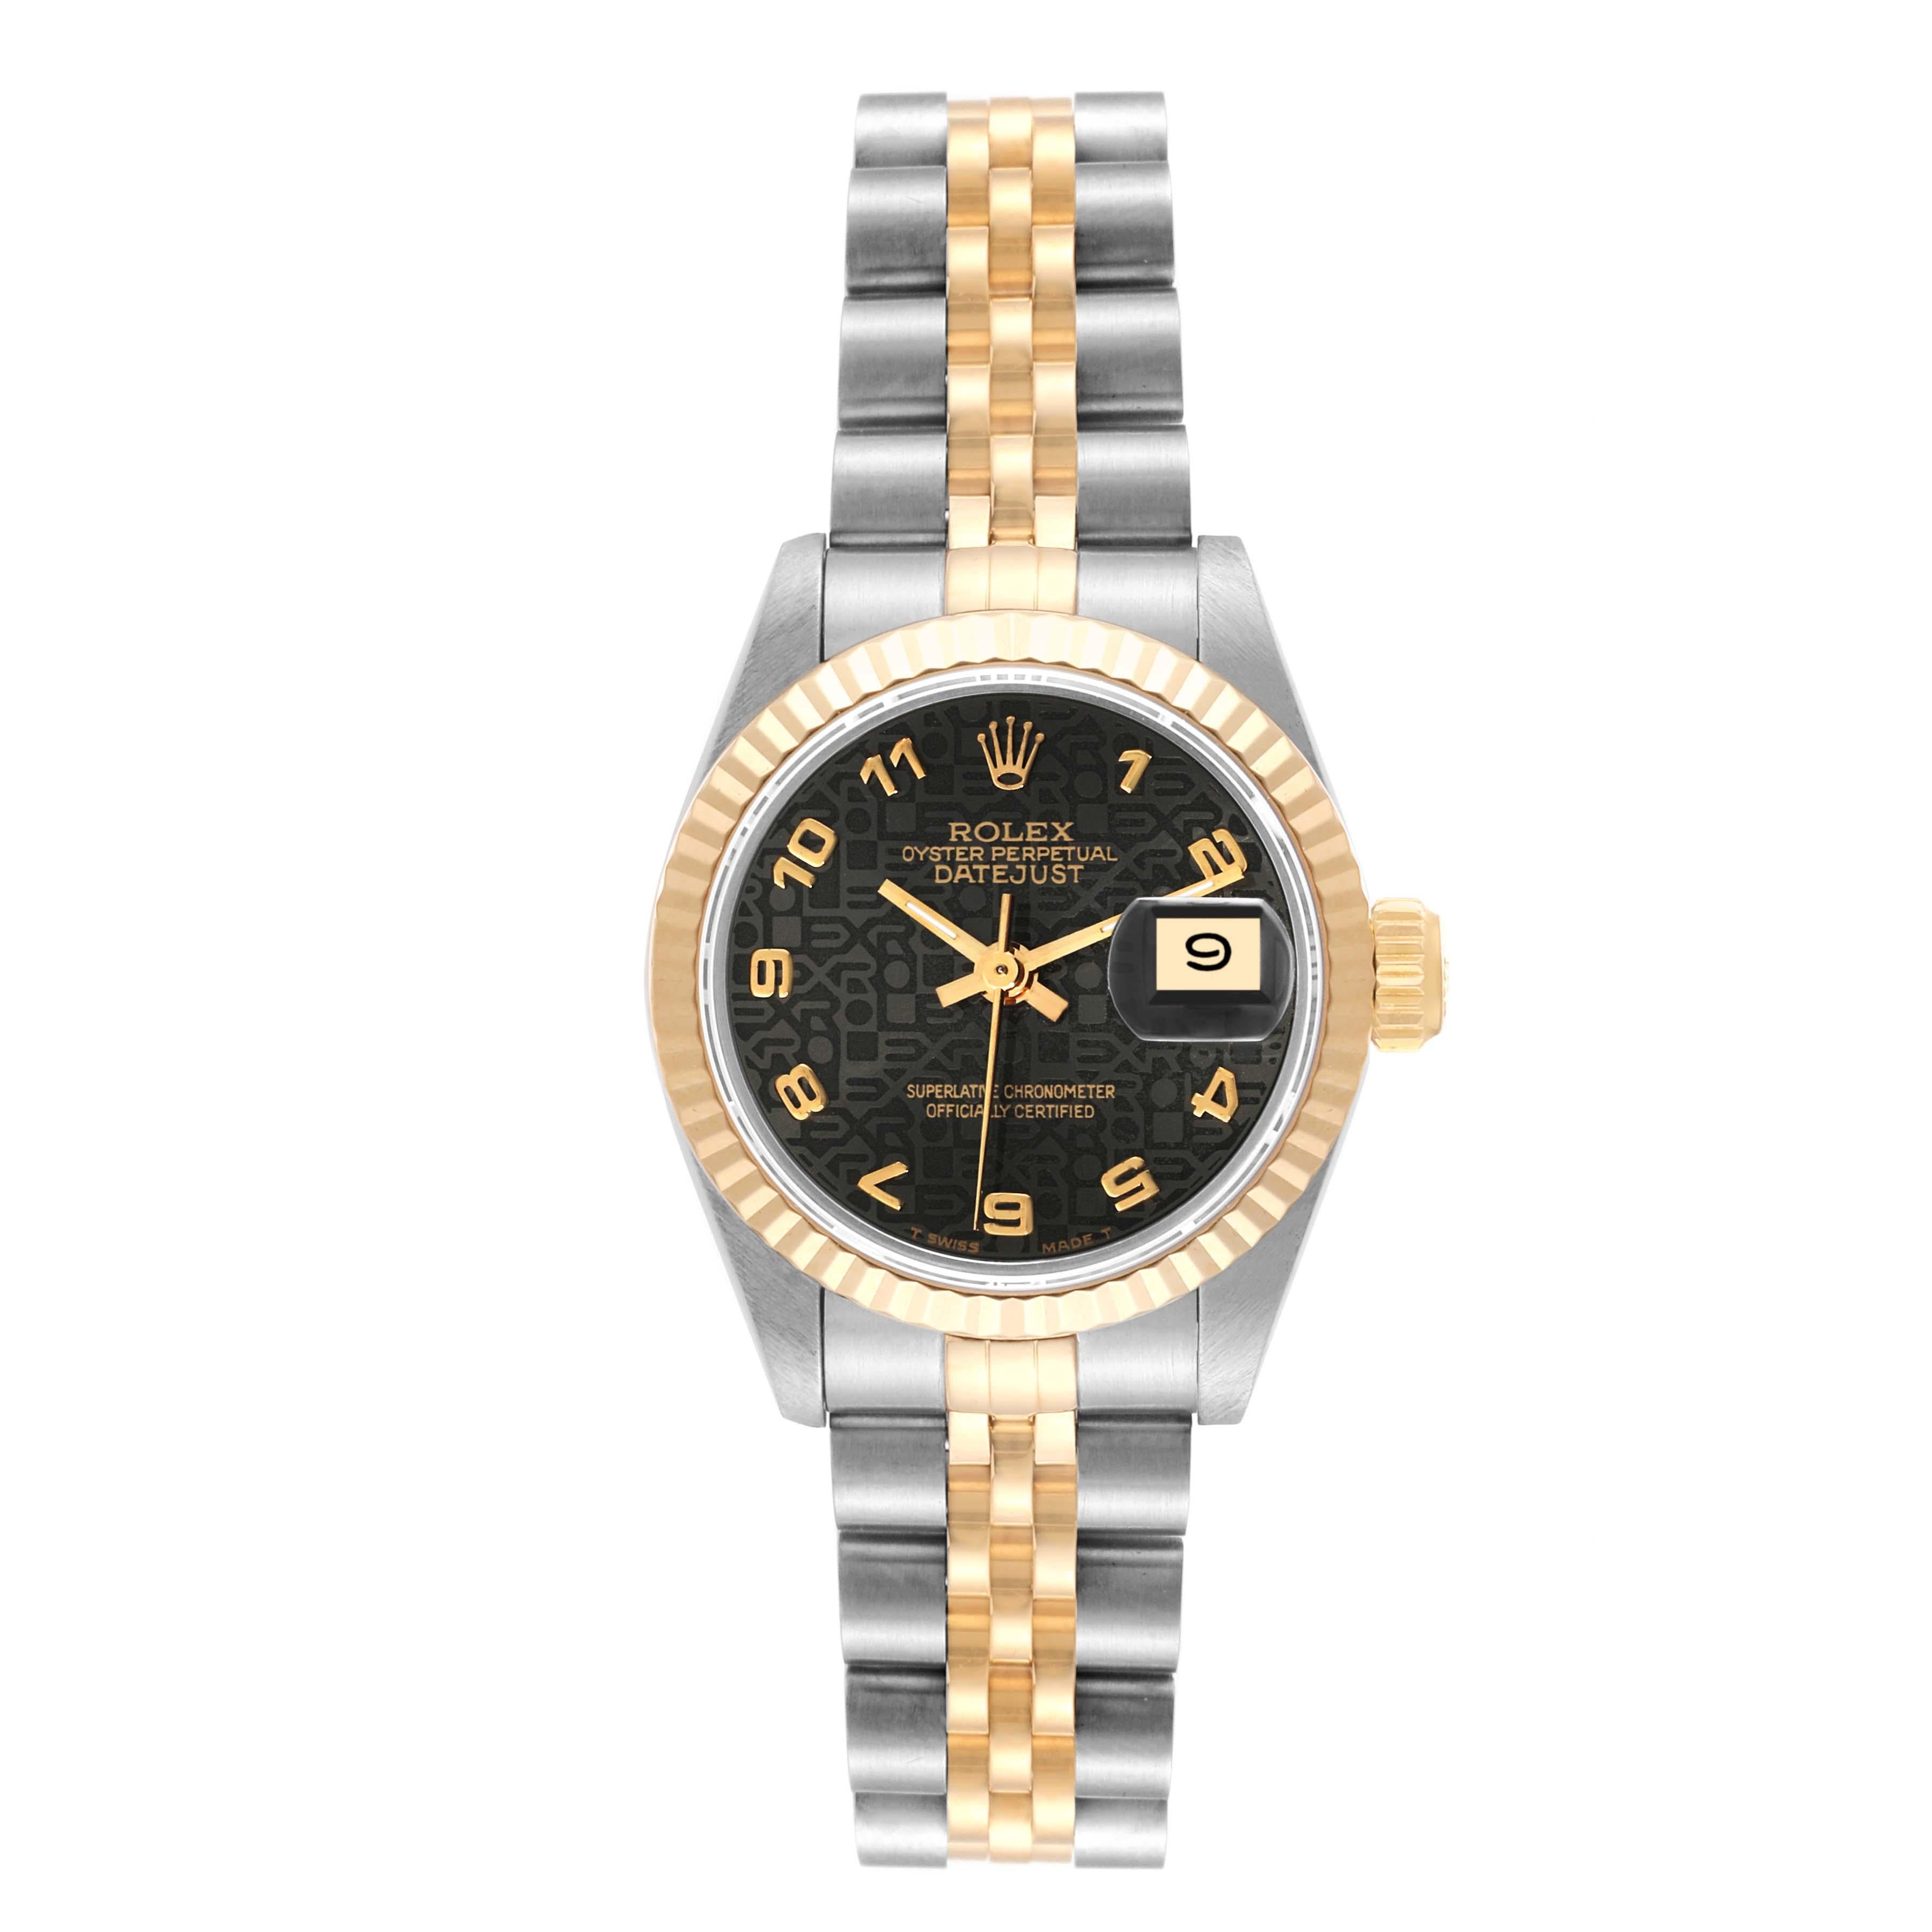 Rolex Datejust Black Anniversary Dial Steel Yellow Gold Ladies Watch 69173. Officially certified chronometer automatic self-winding movement. Stainless steel oyster case 26.0 mm in diameter. Rolex logo on the crown. 18k yellow gold fluted bezel.